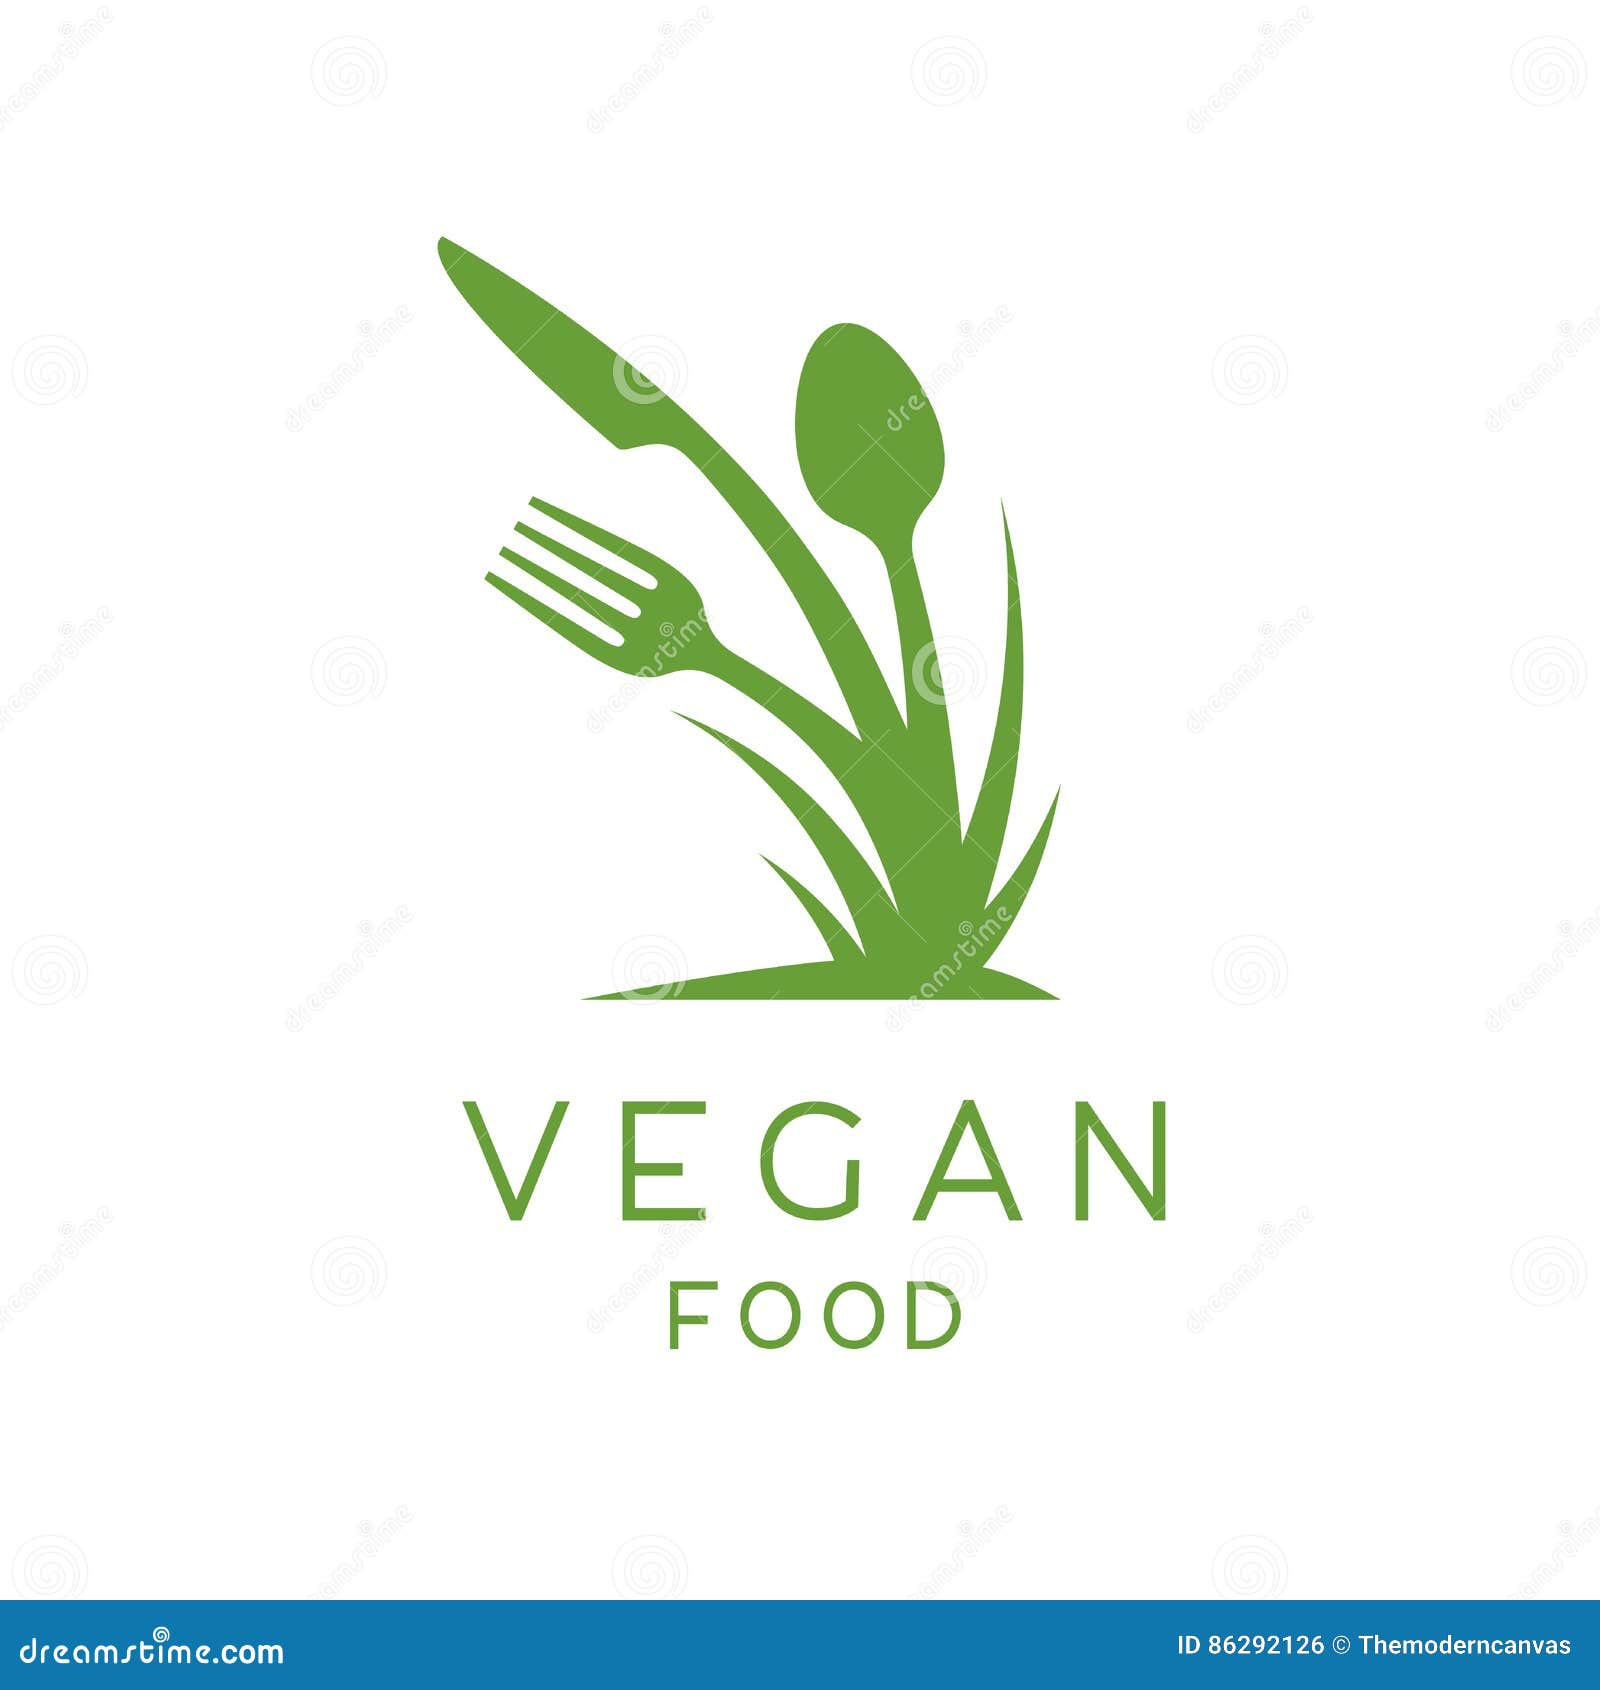 vegan food logo of plant, fork, knife and spoon icon.